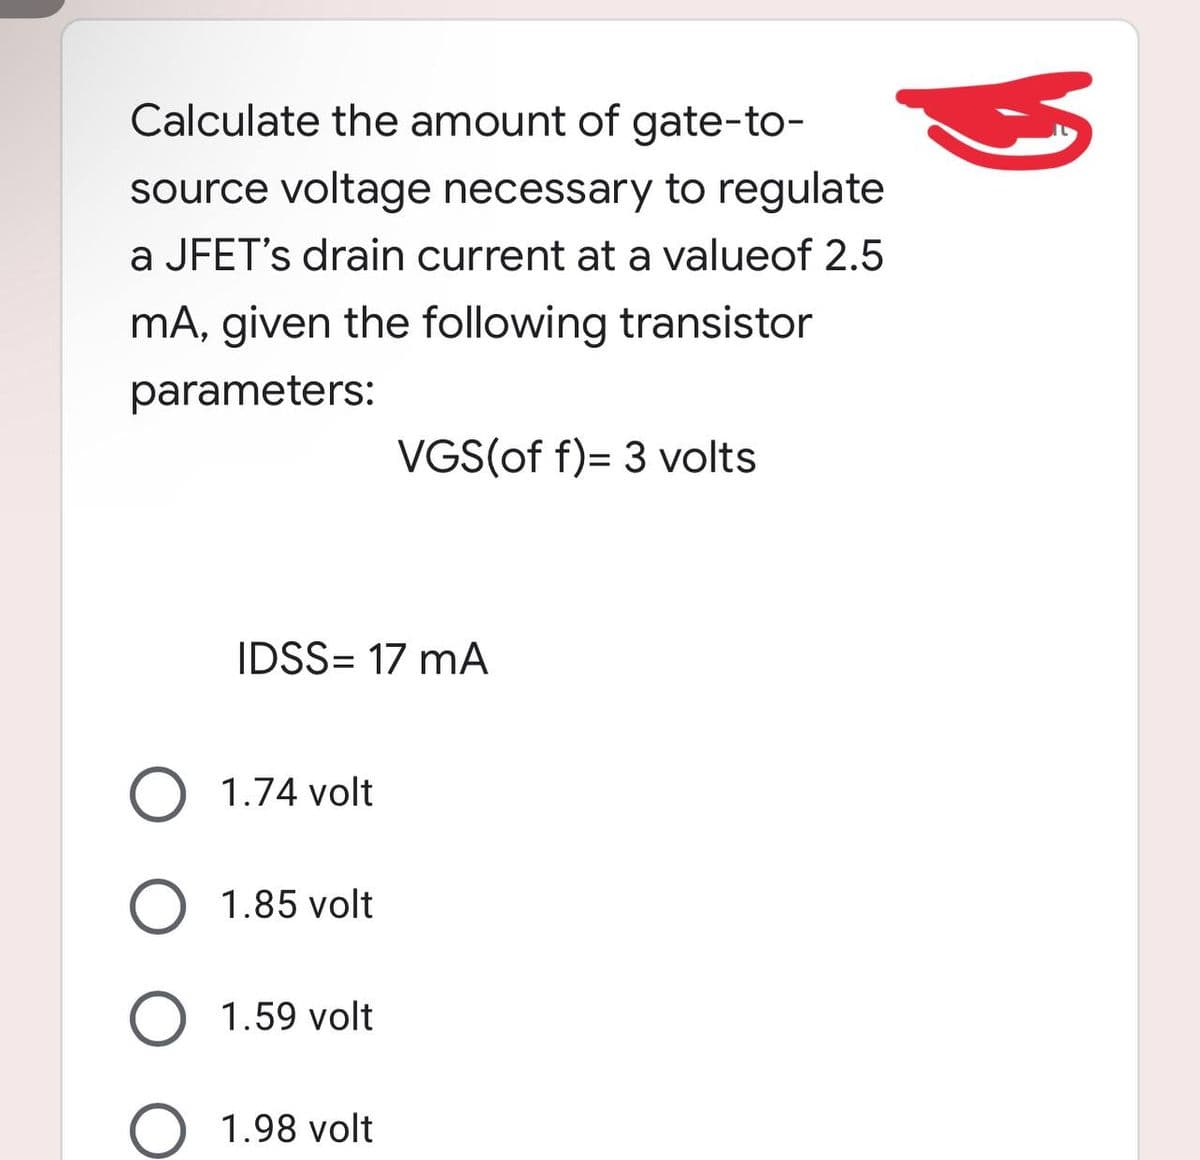 Calculate the amount of gate-to-
source voltage necessary to regulate
a JFET's drain current at a valueof 2.5
mA, given the following transistor
parameters:
VGS(of f)= 3 volts
IDSS= 17 mA
O 1.74 volt
O 1.85 volt
O 1.59 volt
O 1.98 volt
3